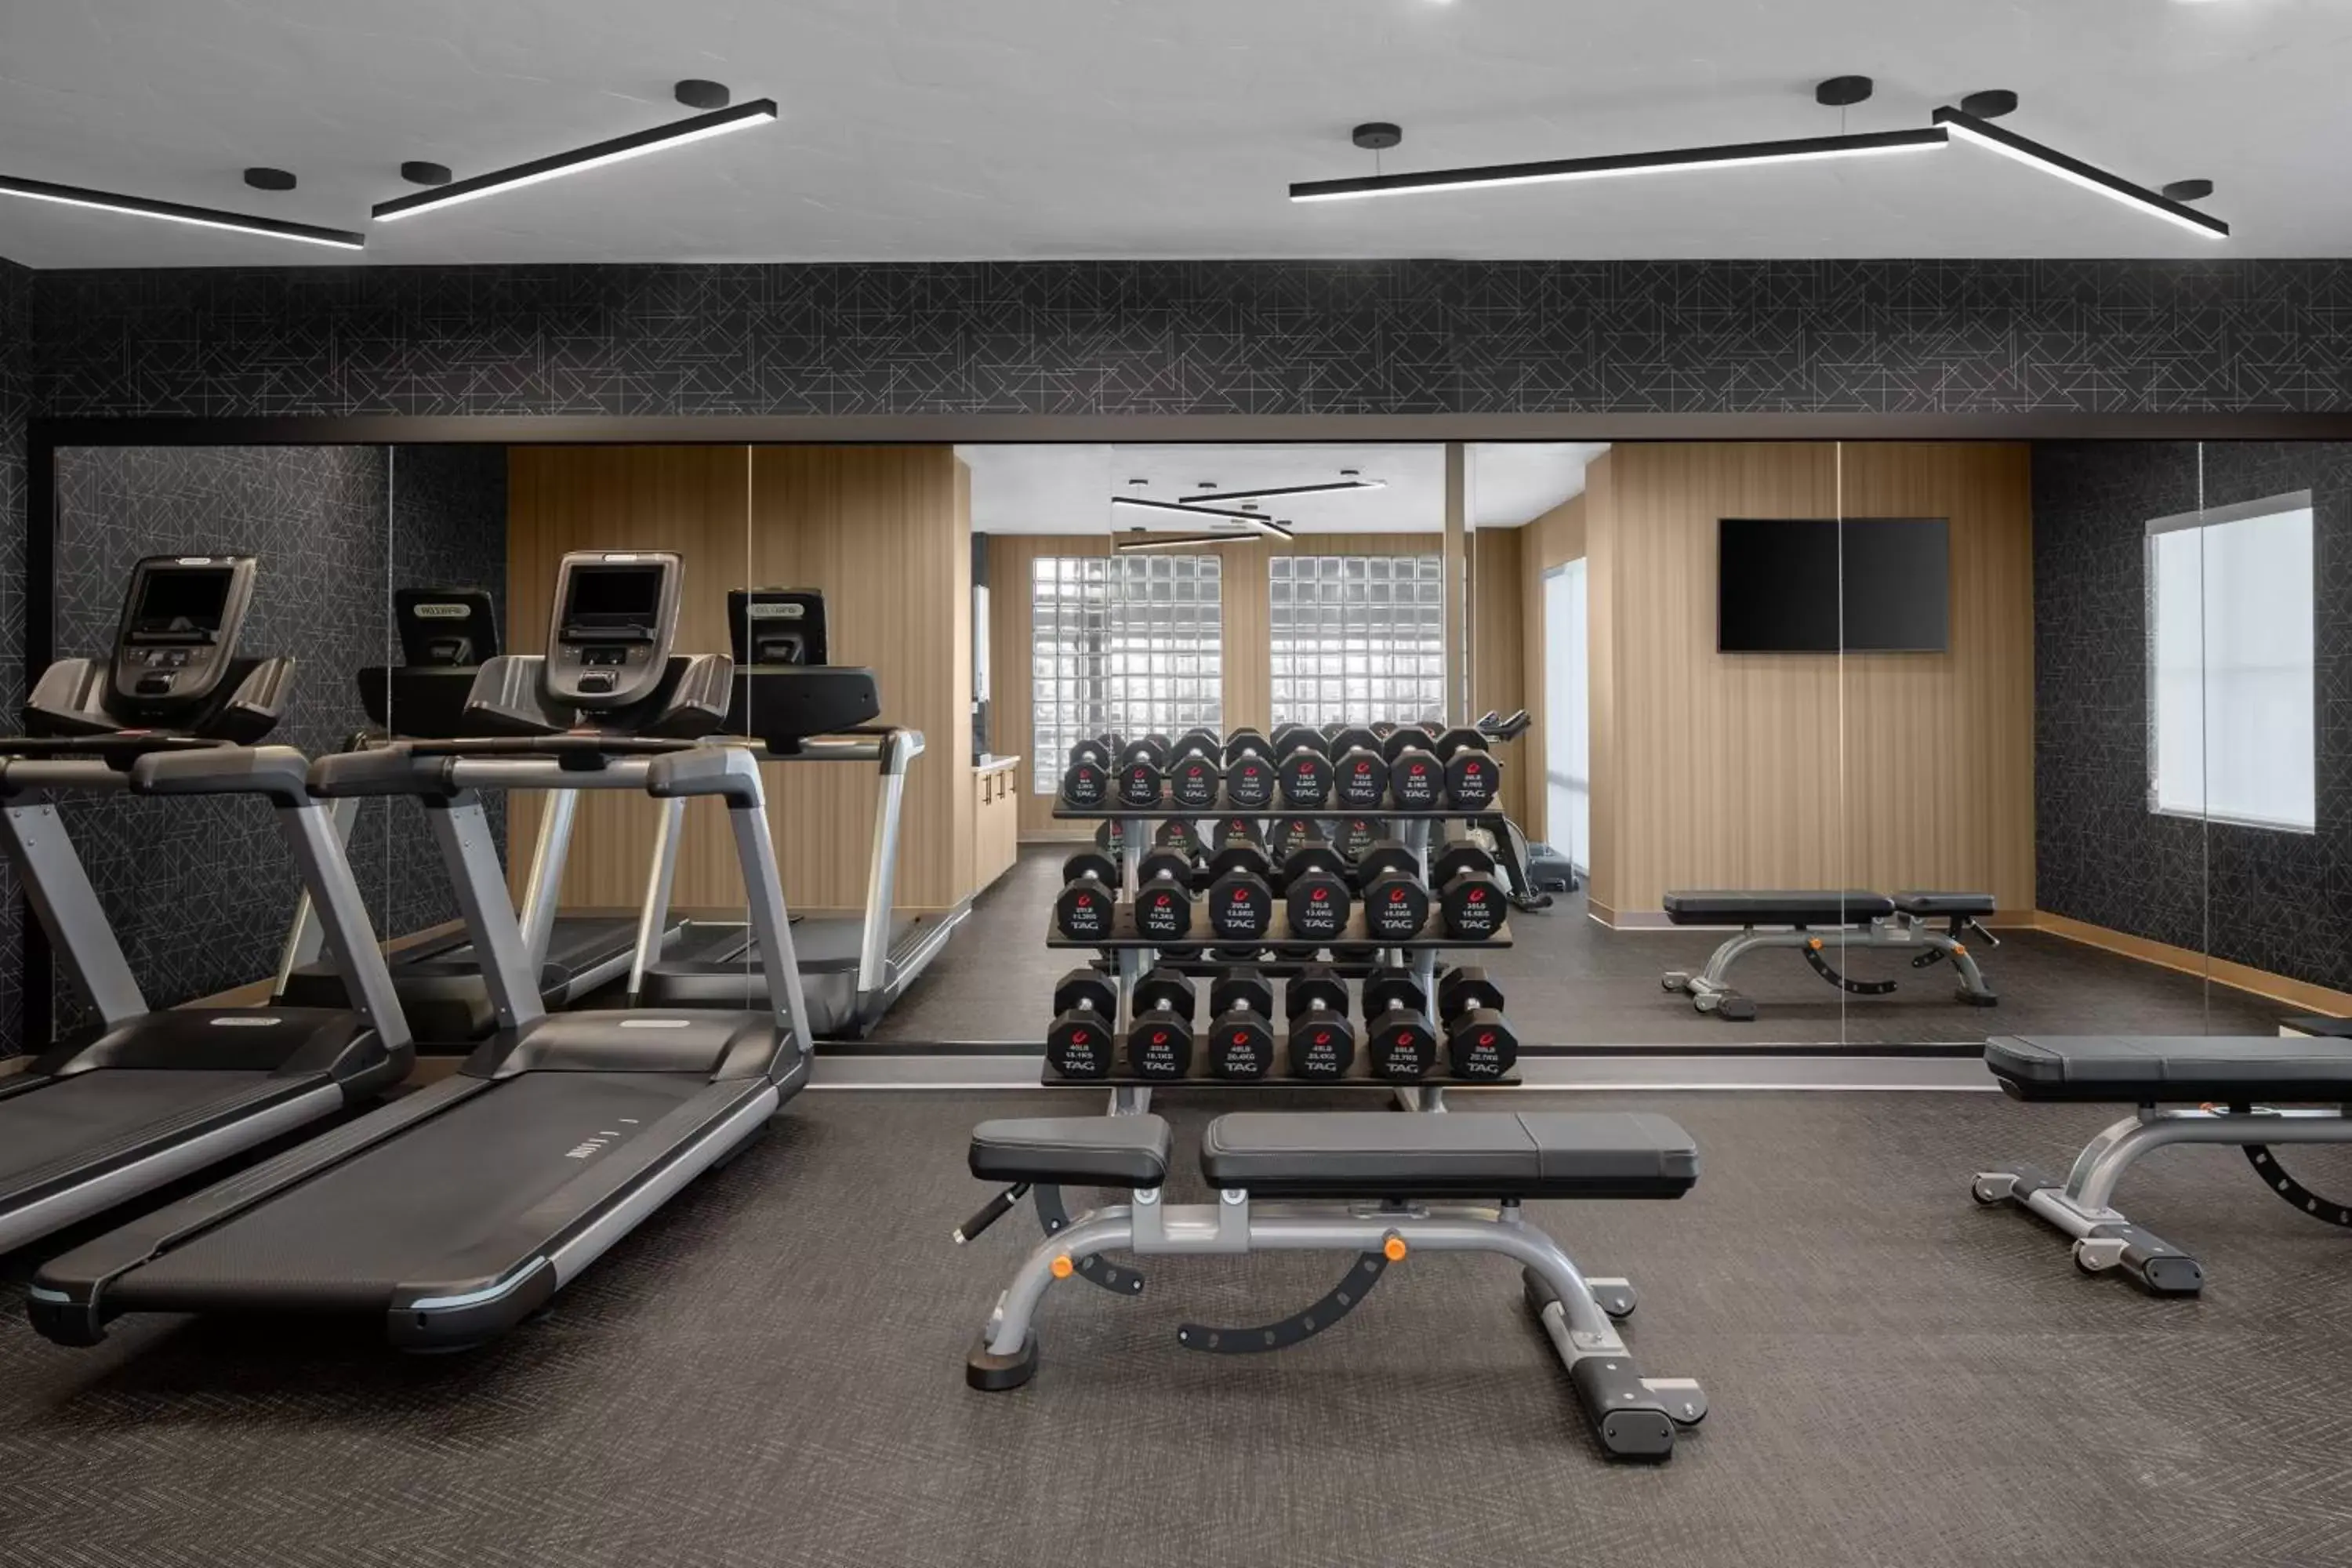 Fitness centre/facilities, Fitness Center/Facilities in AC Hotel Park City